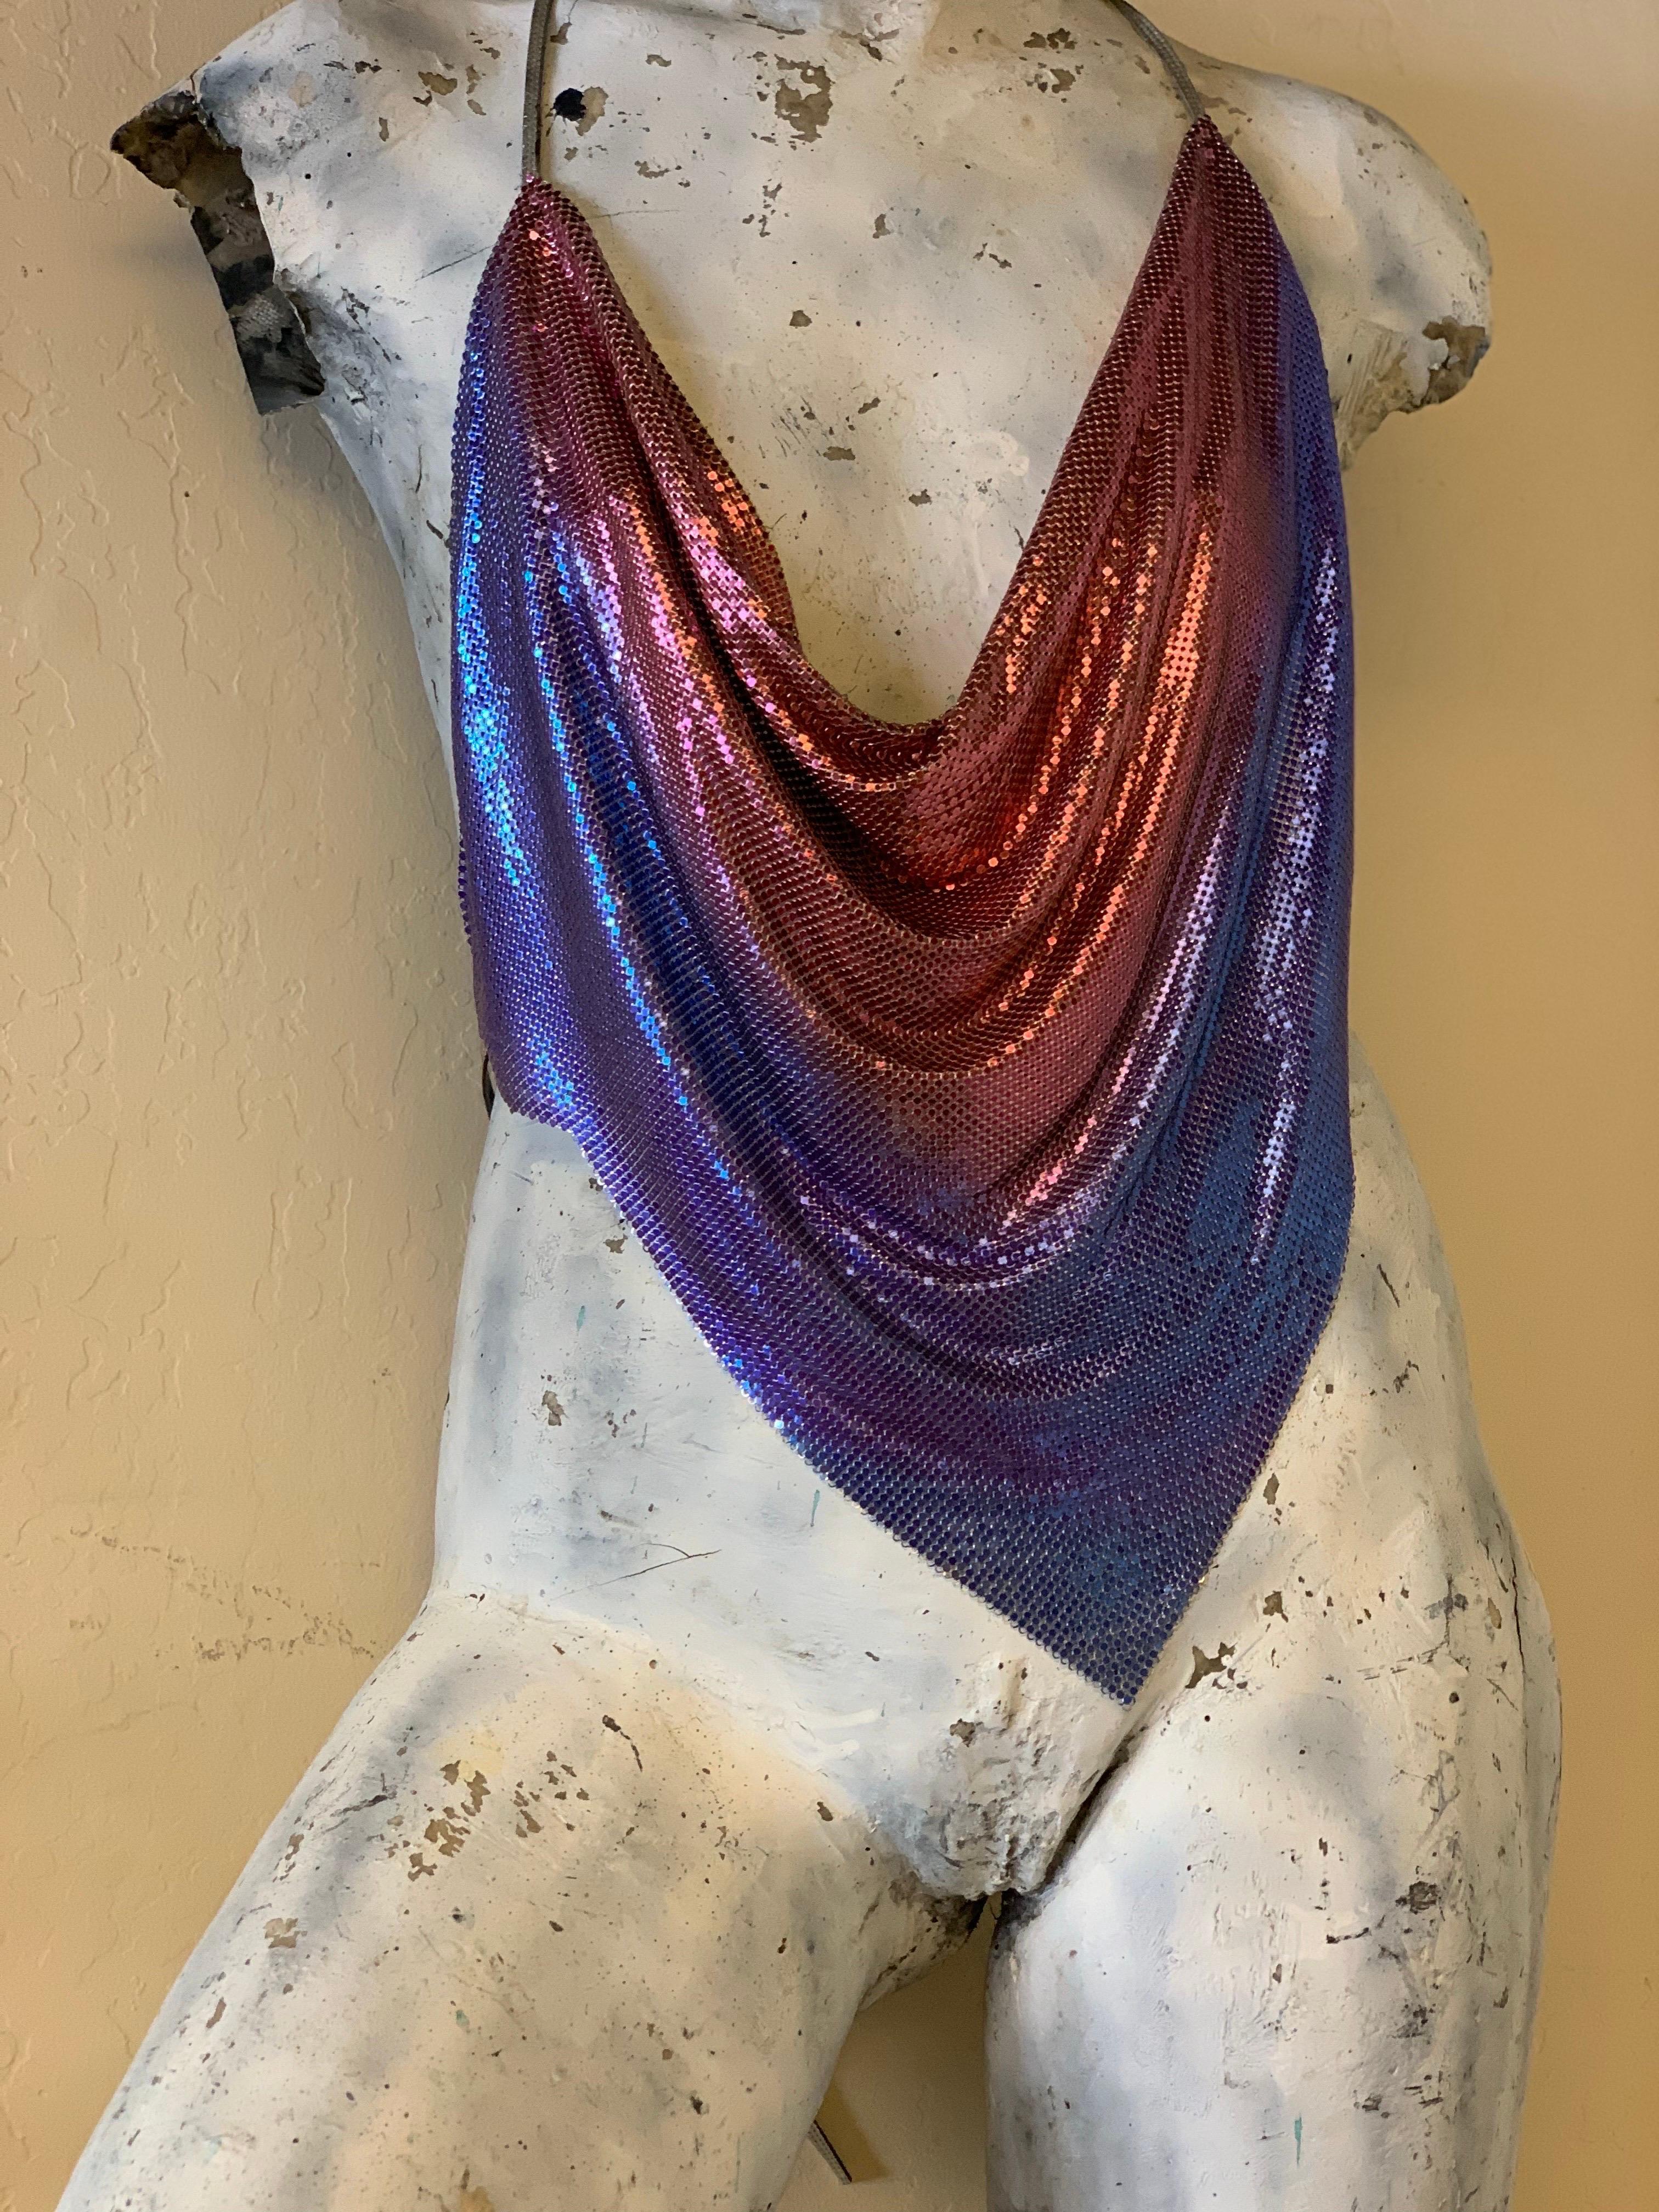 A stunning 1990s Whiting & Davis pink/blue ombre chainmail halter top: A deeply draped cowl neckline, silver-toned base metal with thin silver leather ties at neck and waist. Size small to medium. 